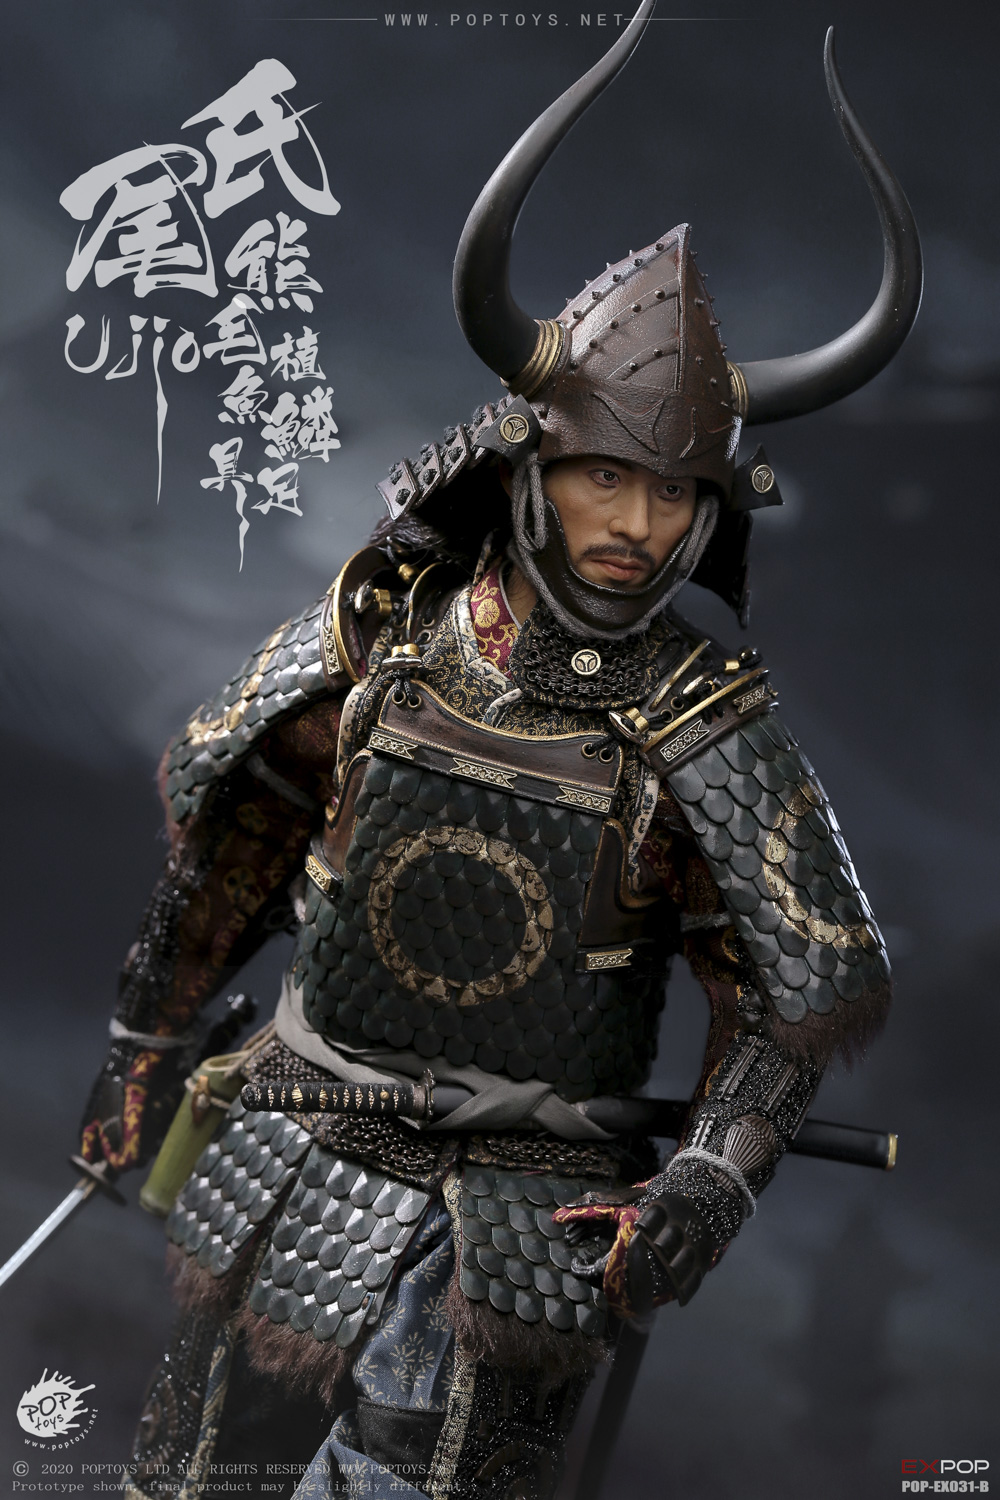 NEW PRODUCT: POPTOYS: 1/6 Warrior Samurai-Oshi [100% Die Casting Alloy Sheet All Steel Sheet Fish Scale Armor] & Commoner Edition [5 styles in total] Loyal Warriors 20492611